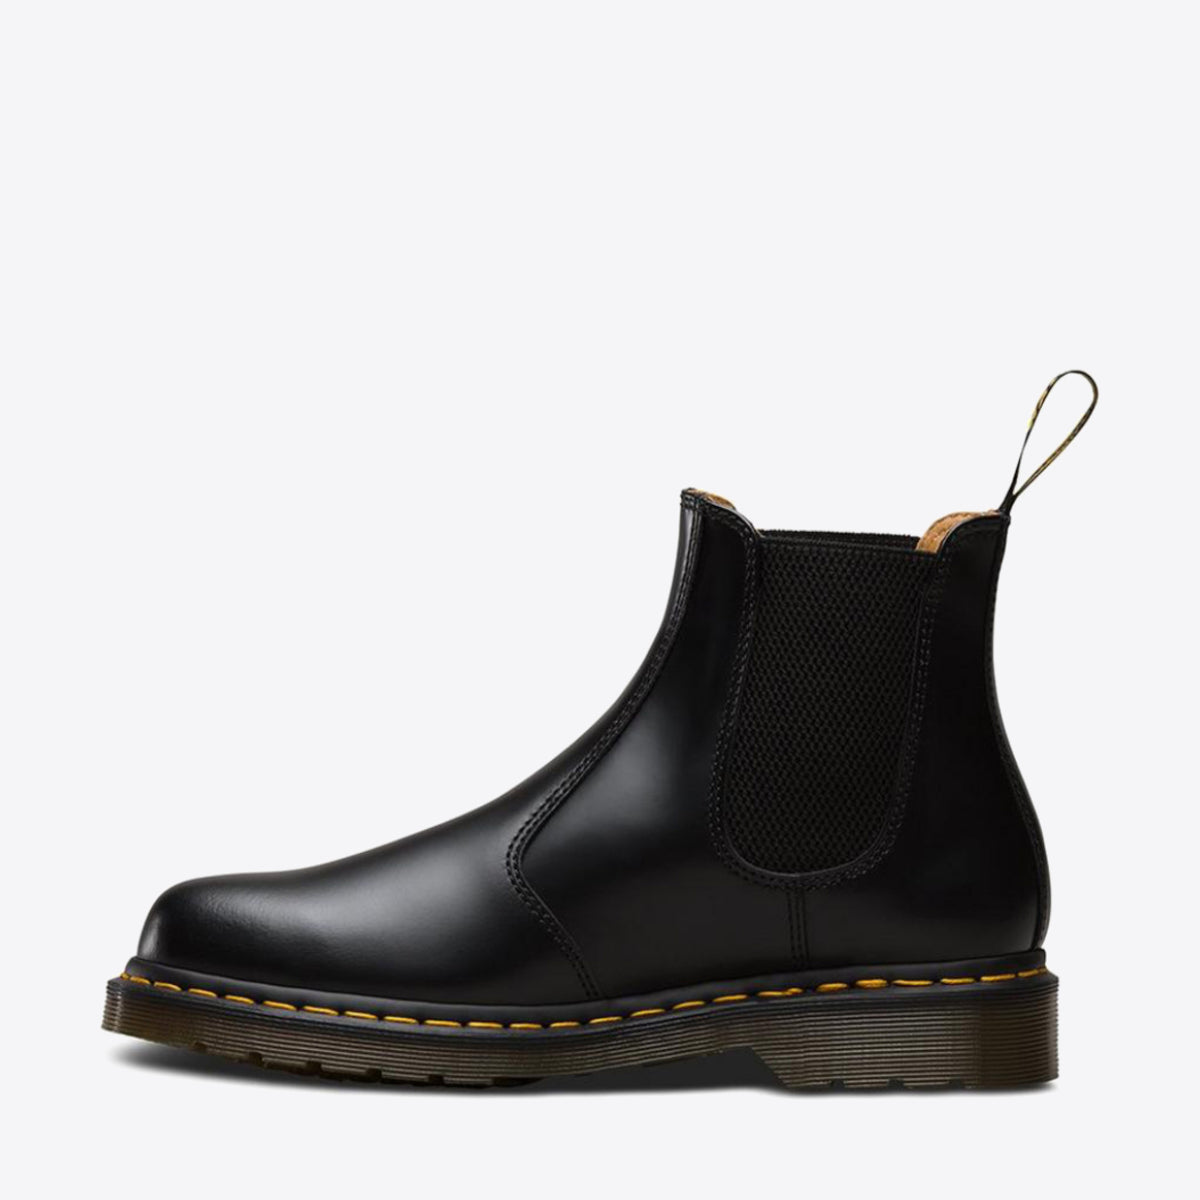 DR MARTENS 2976 Yellow Stitch Chelsea Boot Black Smooth - Image 6